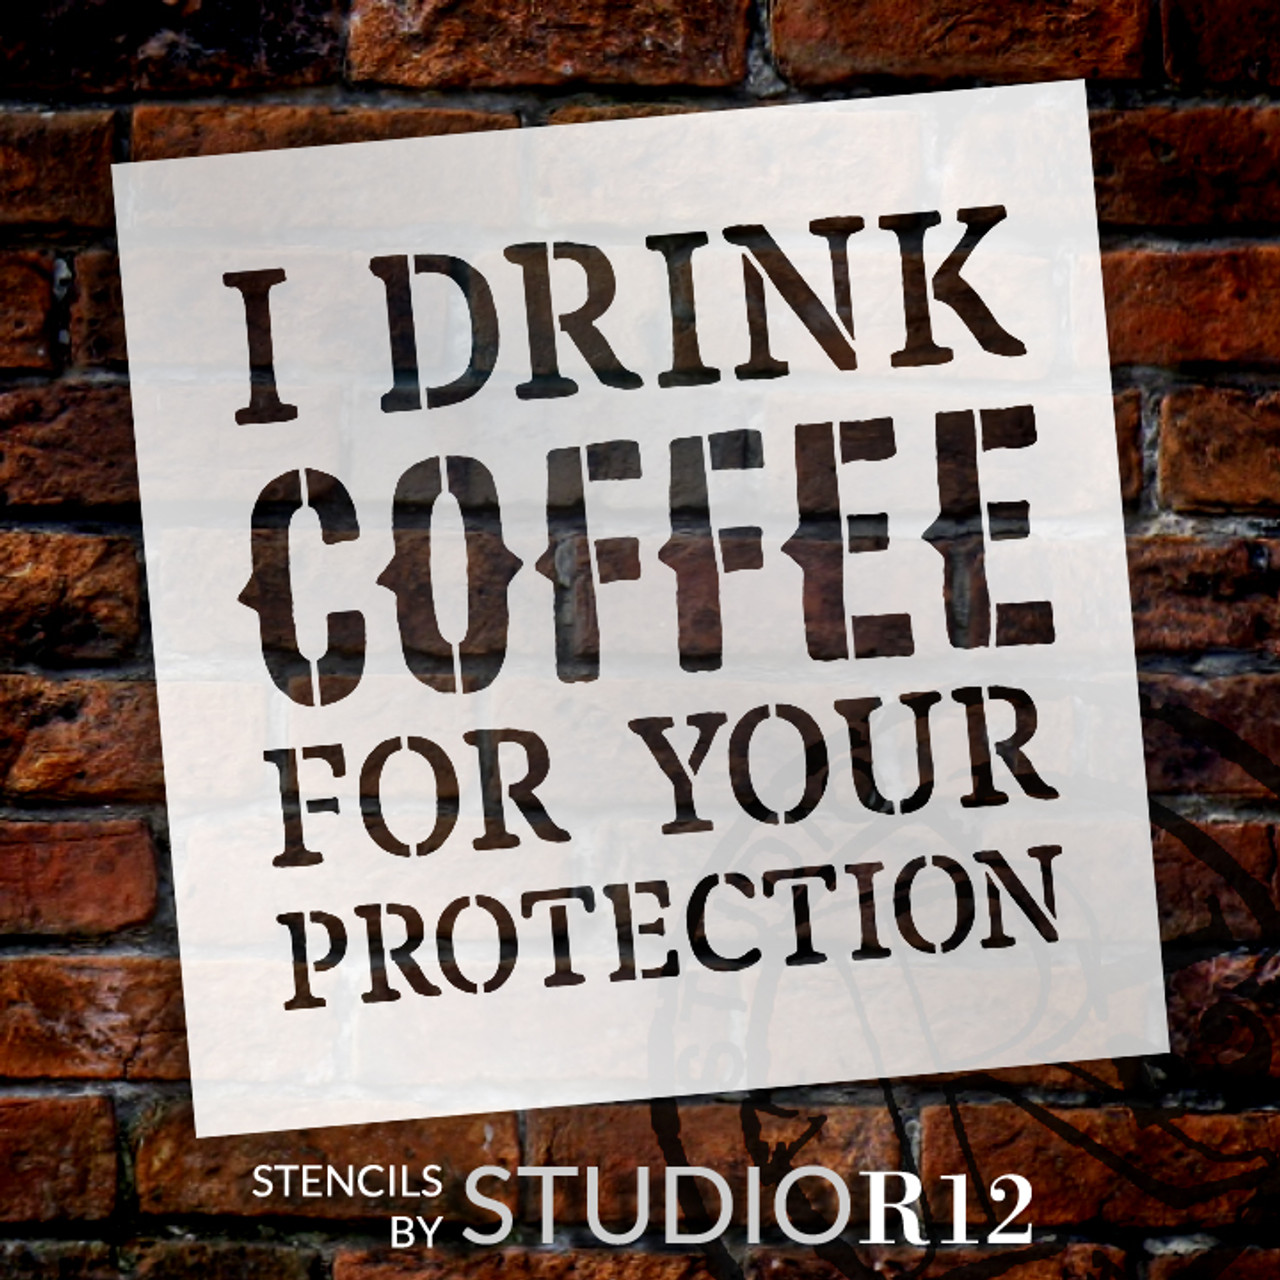 I Drink Coffee For Your Protection - Word Stencil - 6" x 6" - STCL1652_1 - by StudioR12